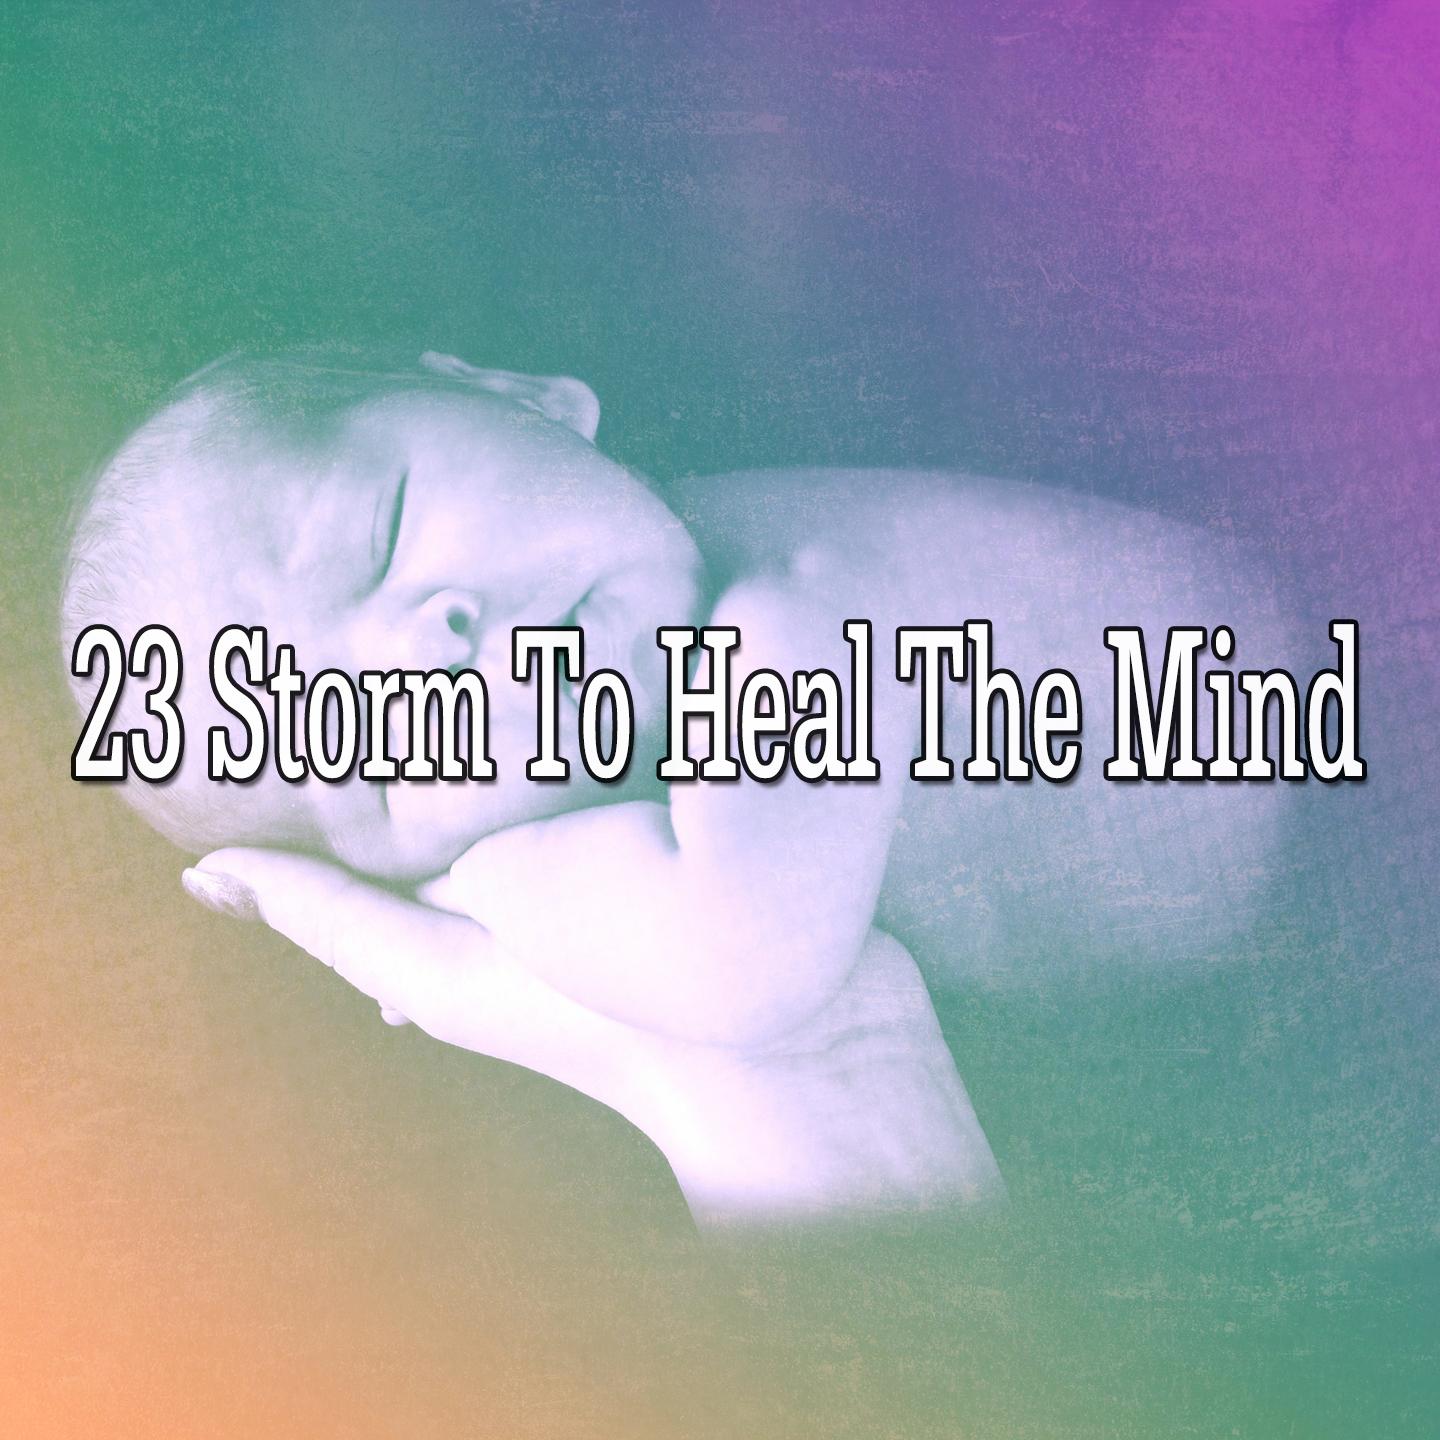 23 Storm to Heal the Mind